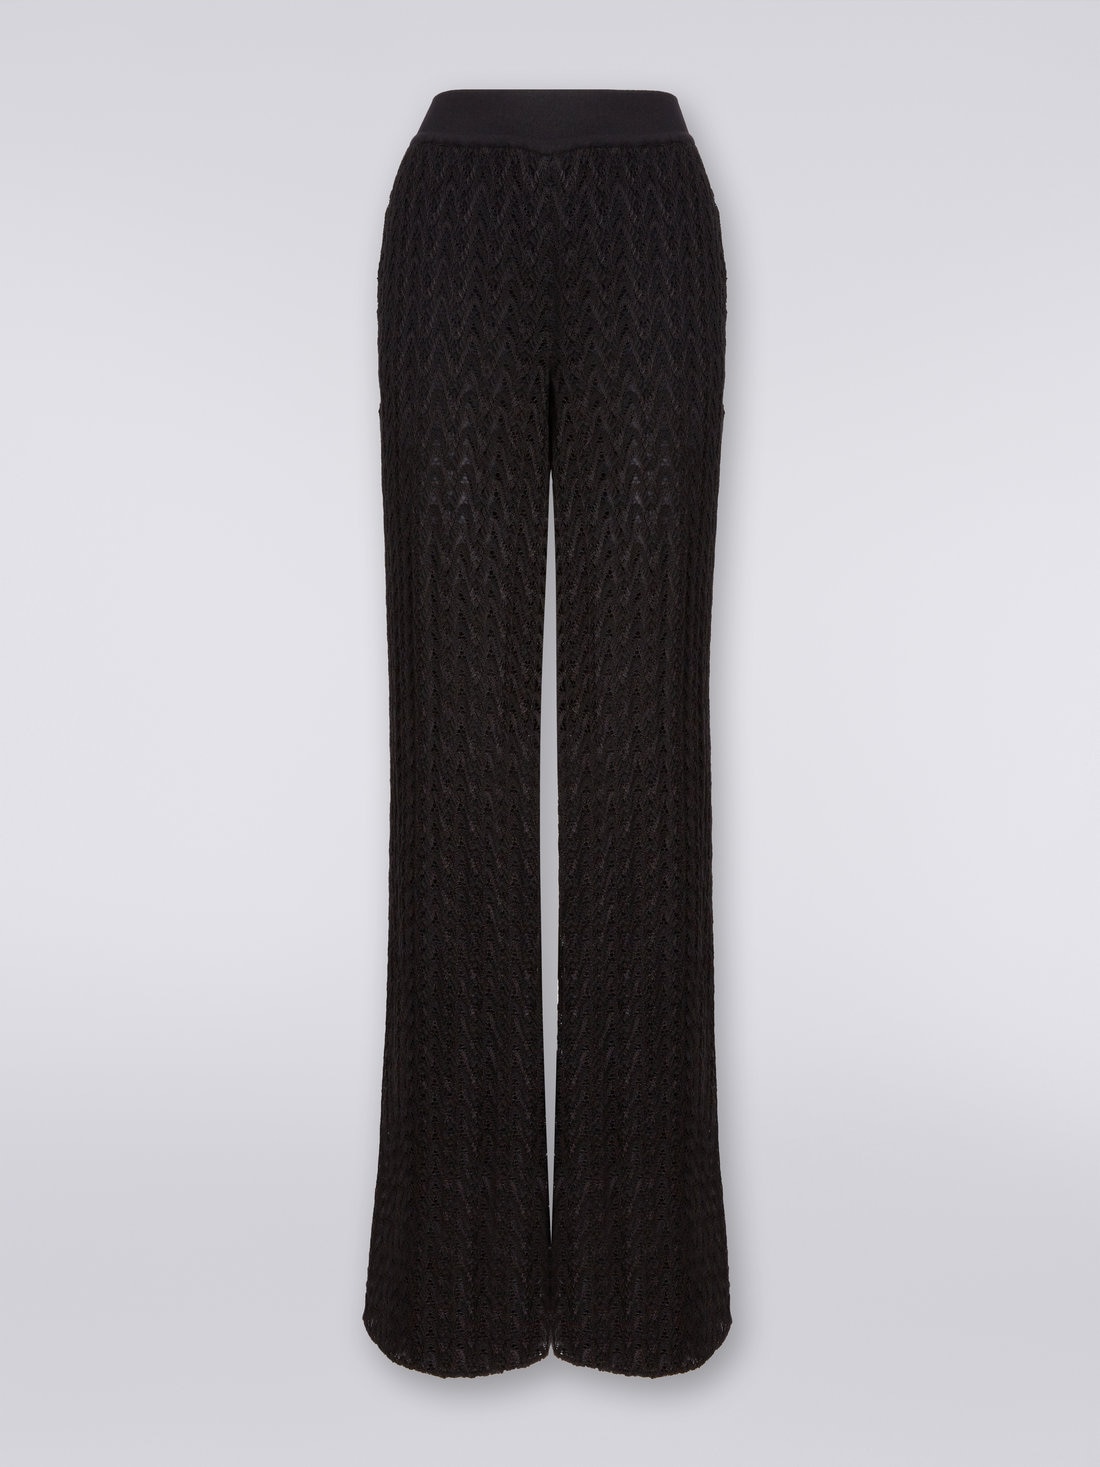 Palazzo pants in raschel knit wool and viscose, Black    - DS23WI0WBR00NU93911 - 0